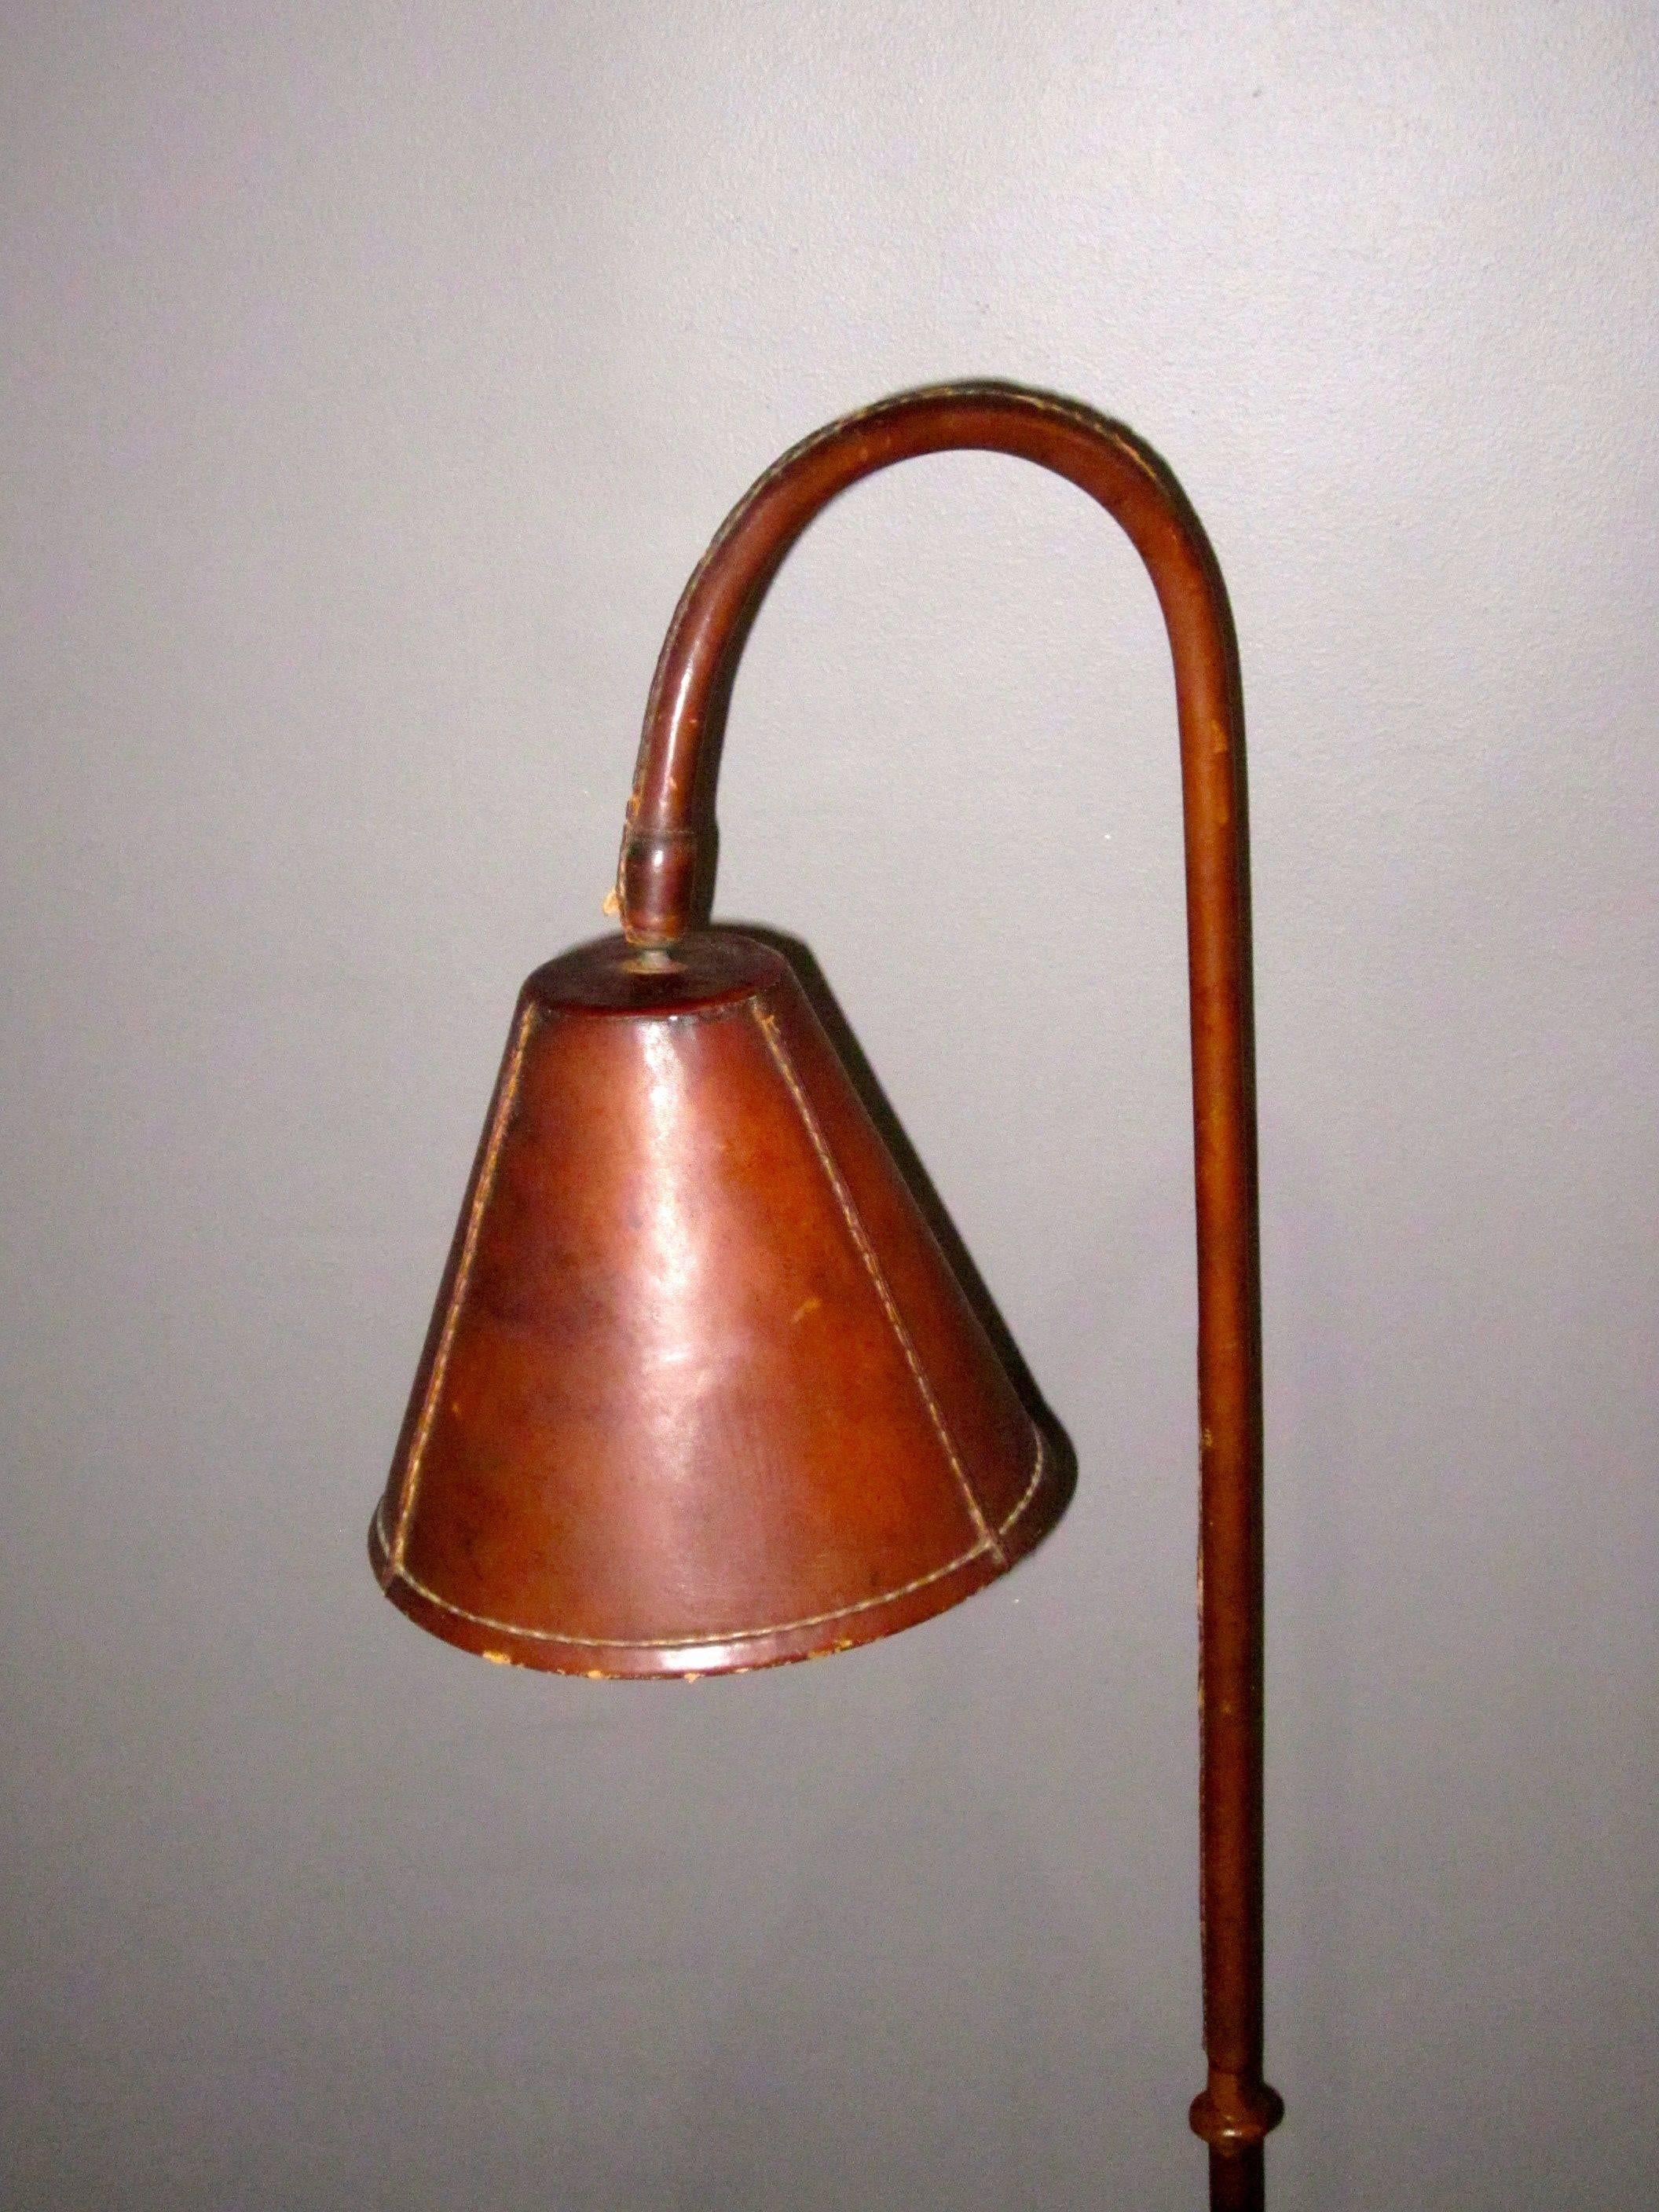 1960's Spanish brown leather floor lamp by Valenti.
Entire lamp is leather with top stitching at all seams.
Recently rewired.
Very good condition.
